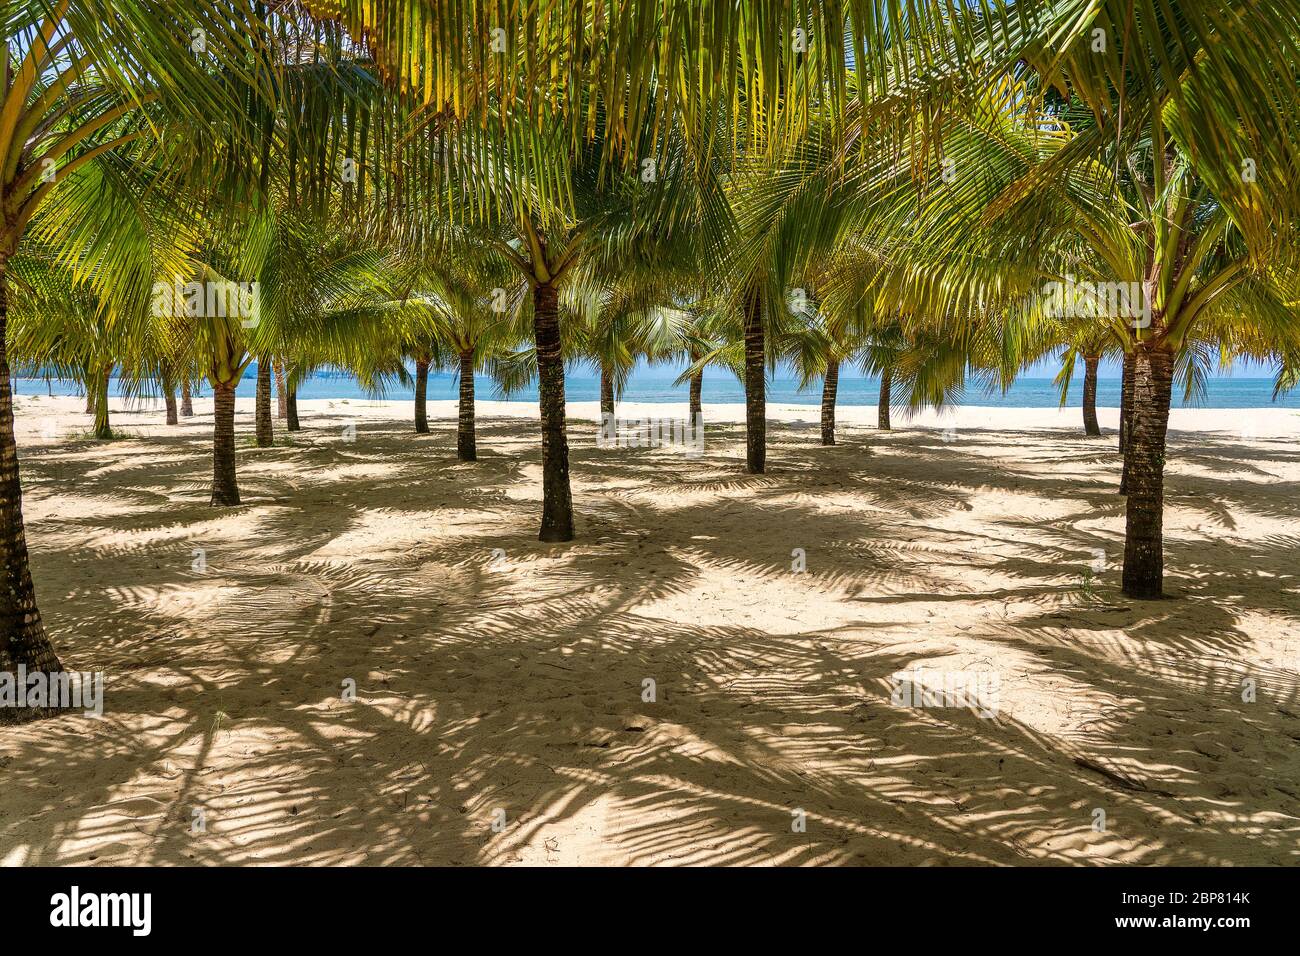 Green coconut palm trees on white sandy beach near South China Sea on the island of Phu Quoc, Vietnam. Travel and nature concept Stock Photo